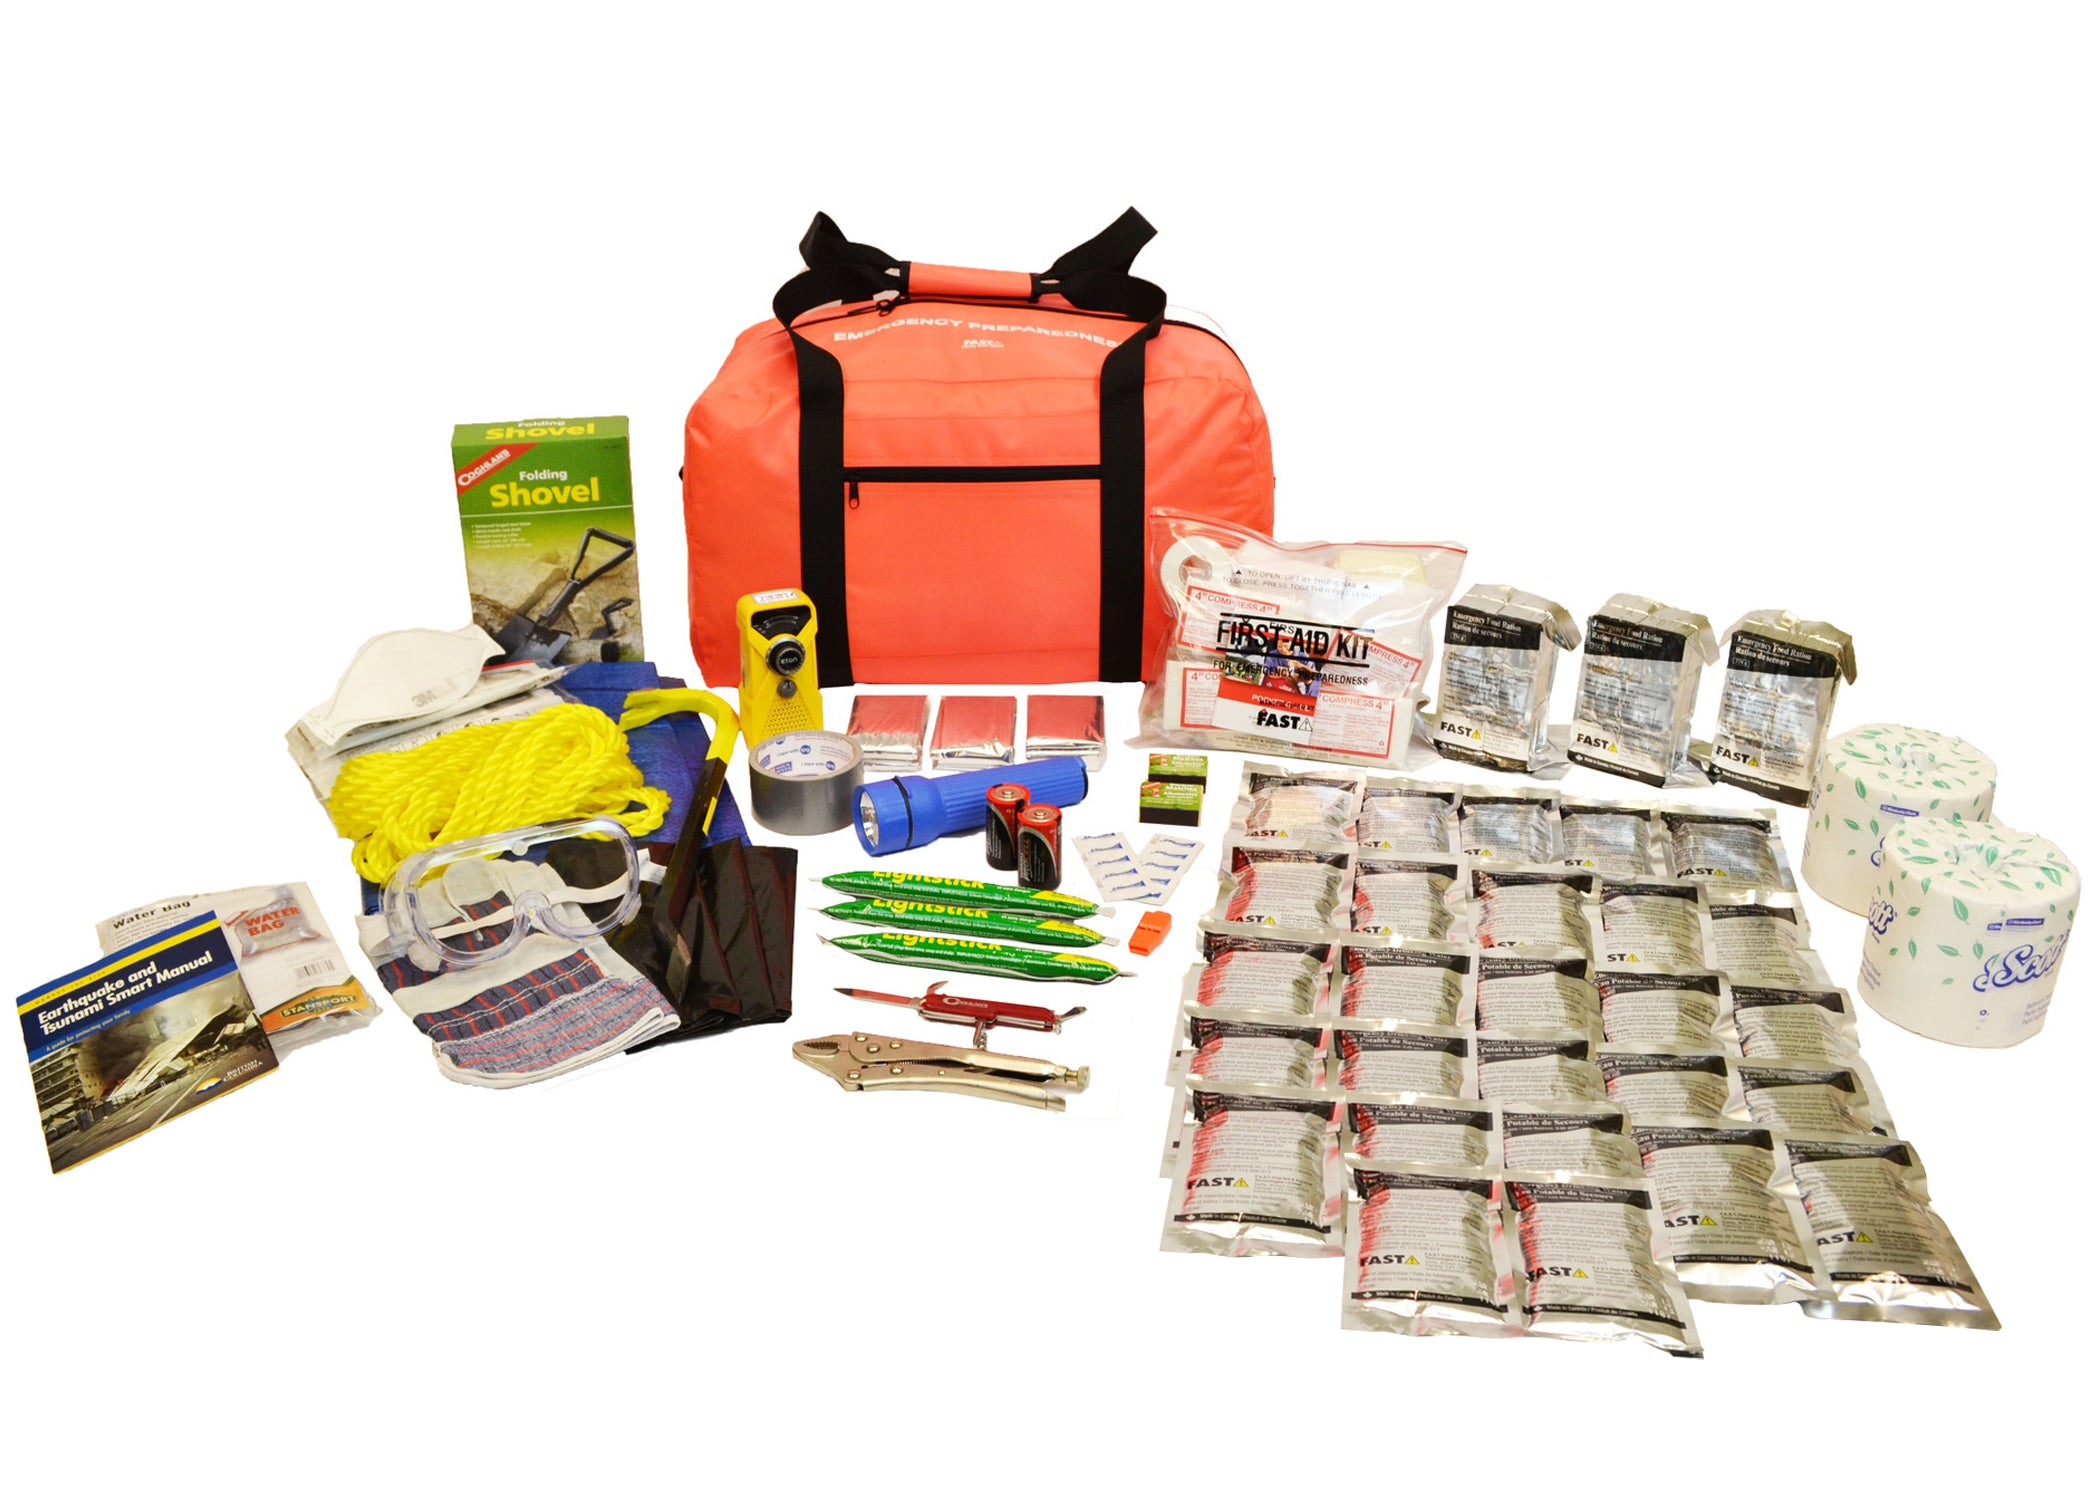 Grab-and-Go 3 Person Emergency Kits - for 72 hour preparedness